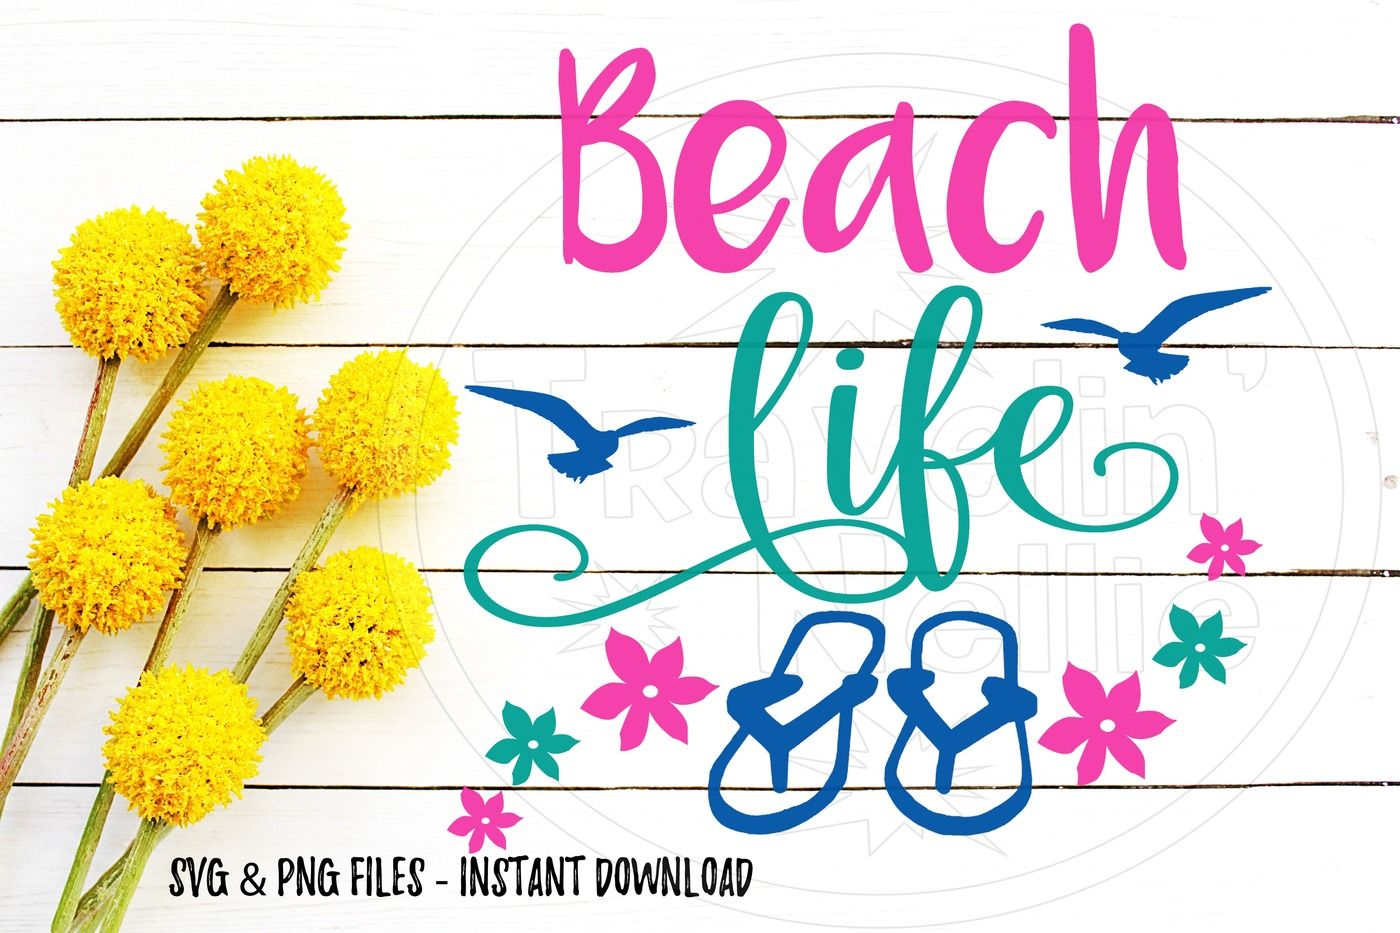 Beach Life Svg Png Image For Cutting Machines Cricut Cameo Brother Diy By Travelin Nellie Thehungryjpeg Com